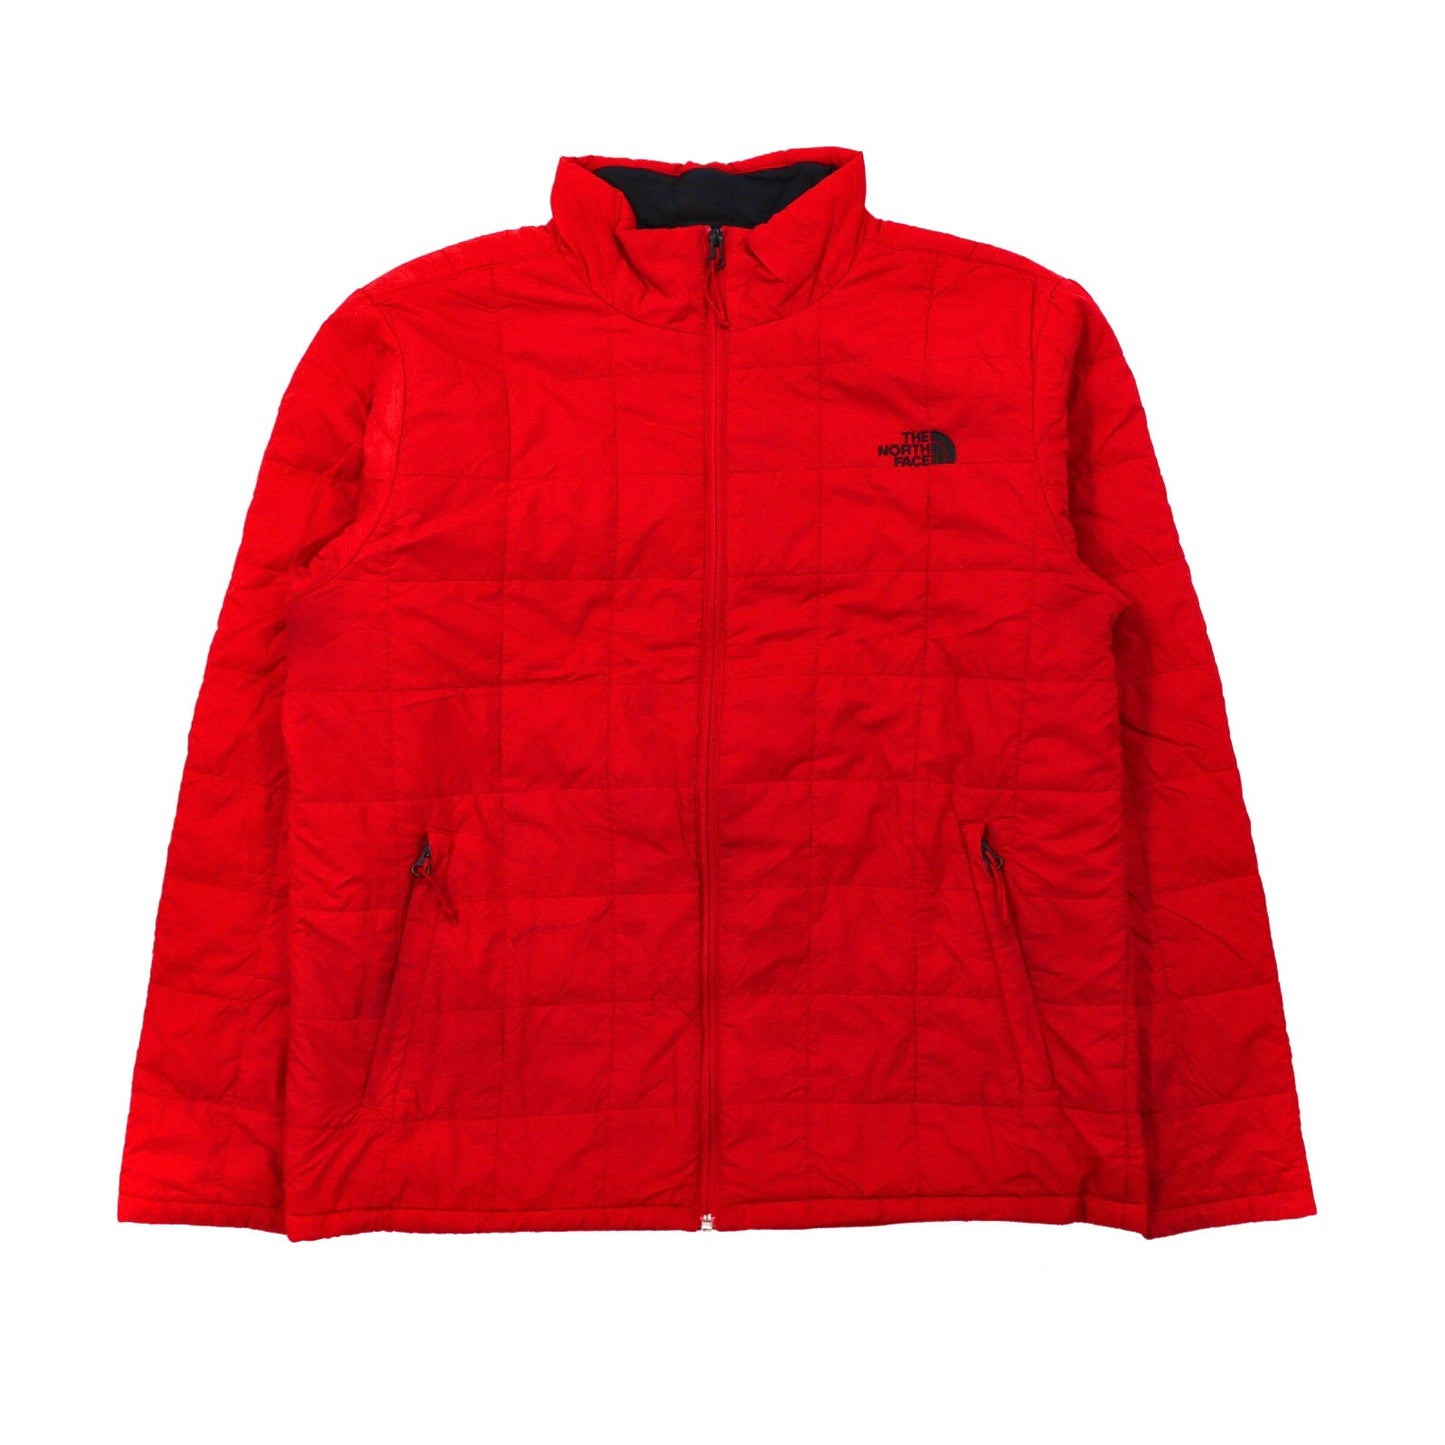 THE NORTH FACE インサレーションジャケット S レッド ナイロン-THE NORTH FACE-古着